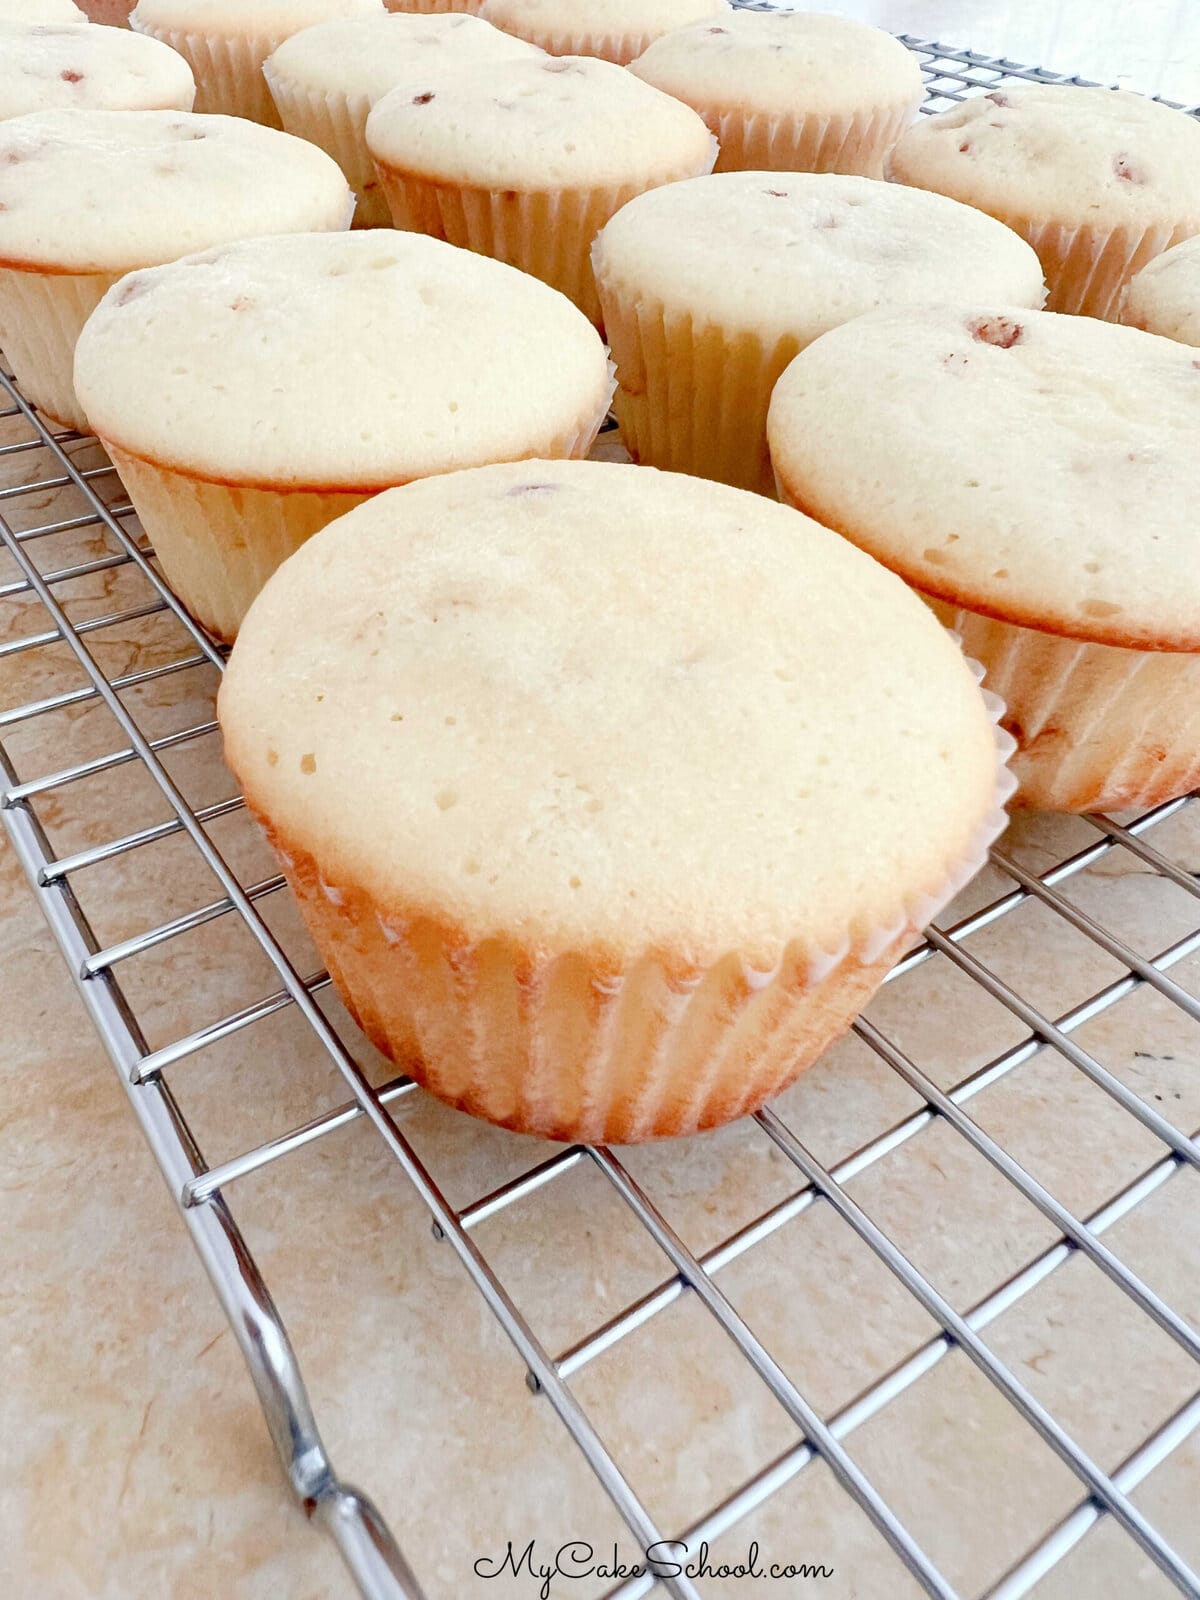 Snickerdoodle Cupcakes, freshly baked and on a cooling rack.